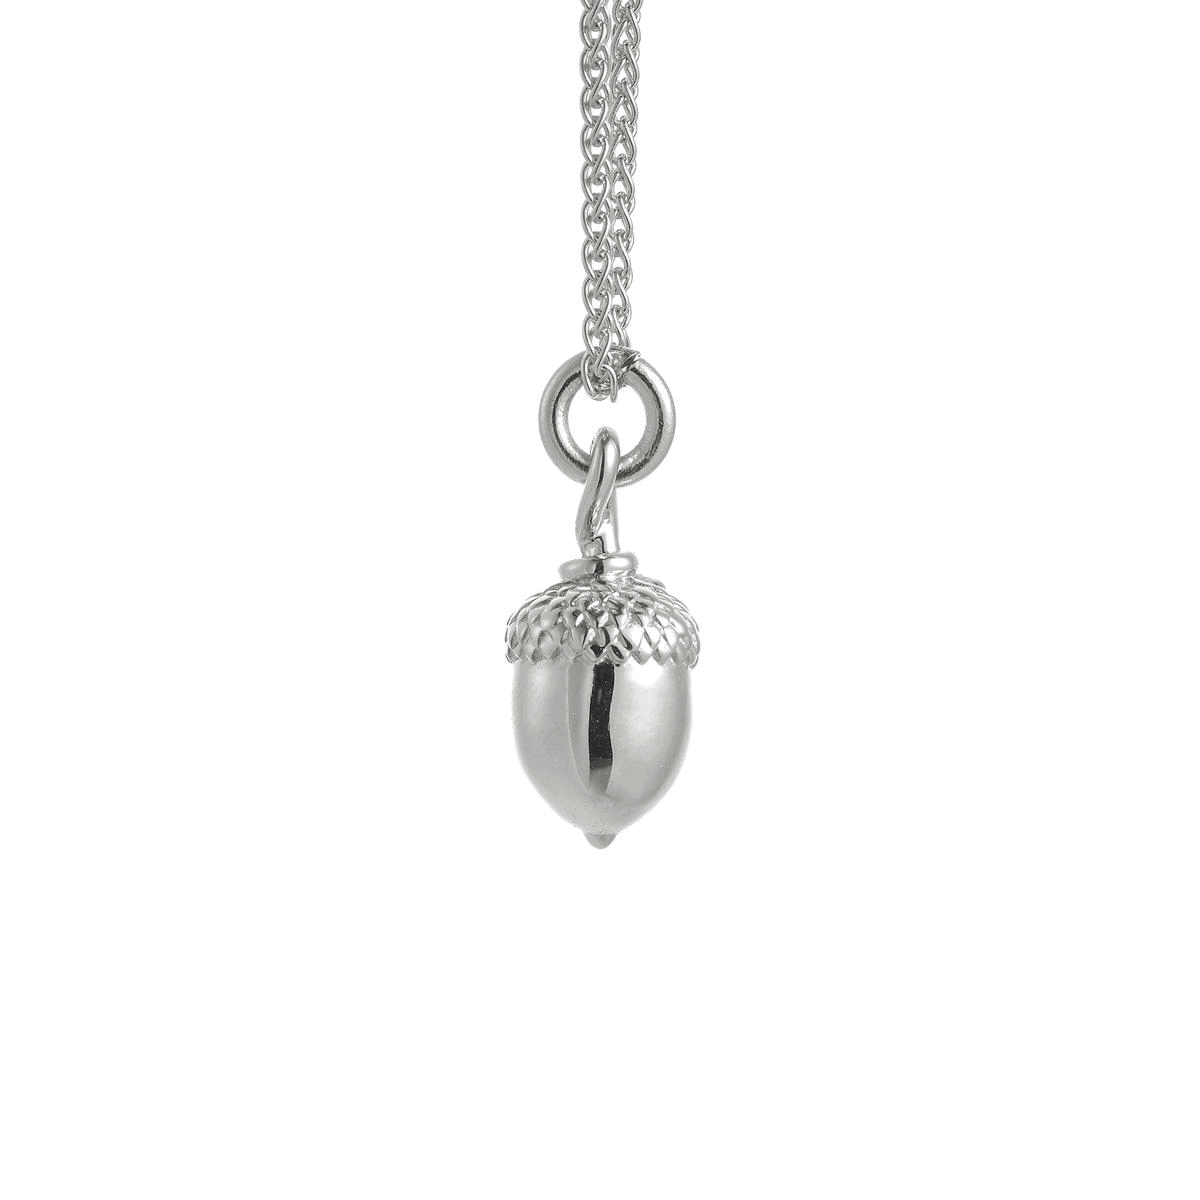 Solid Sterling Silver Acorn Charm Pendant - Symbolic Nature-Inspired Jewelry